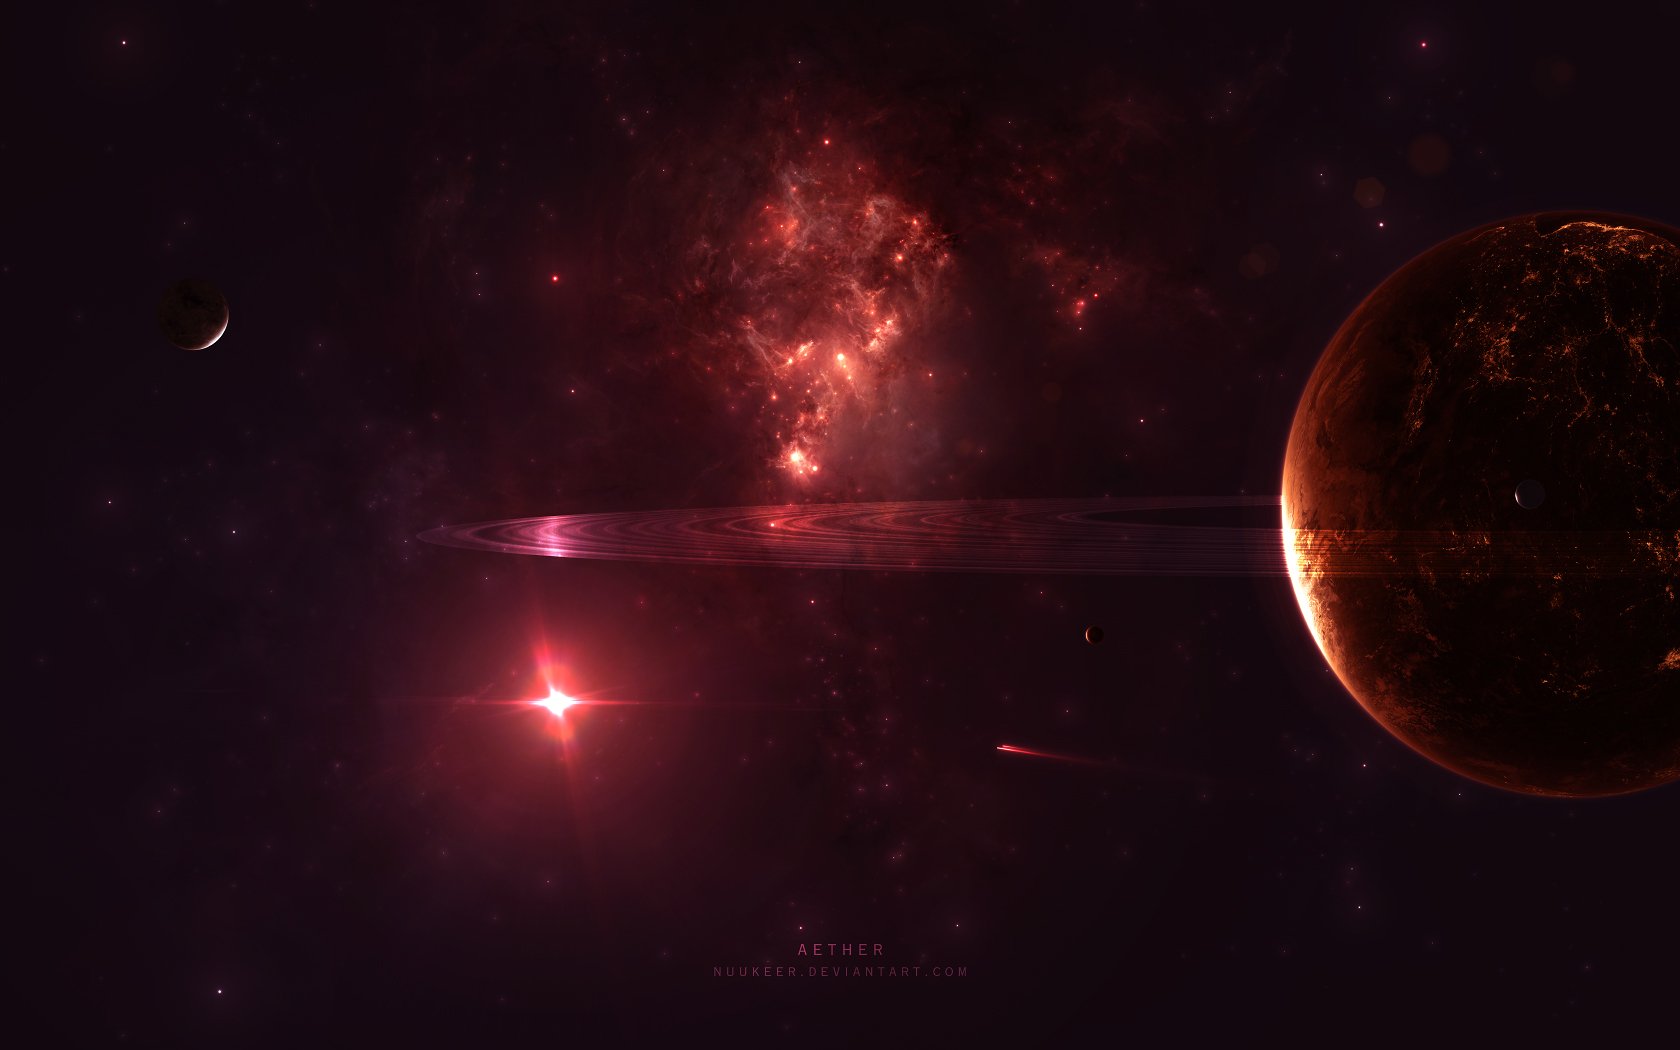 outer, Space, Red, Lights, Planets, Nebulae, Rings, Deviantart, Bright, Moons Wallpaper